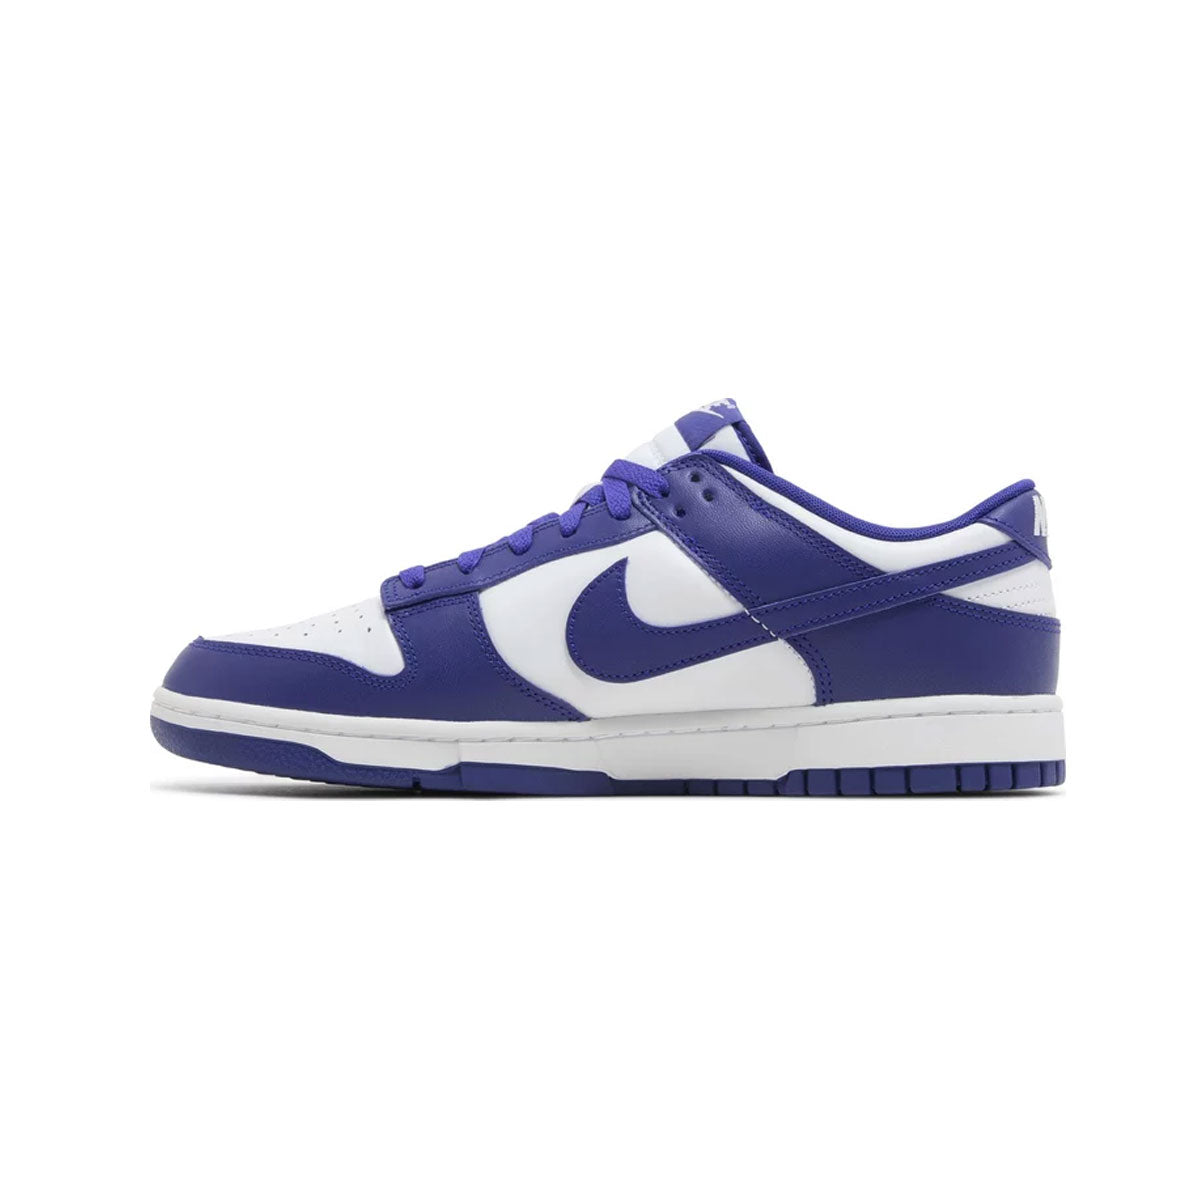 Nike Dunk Low “Concord”